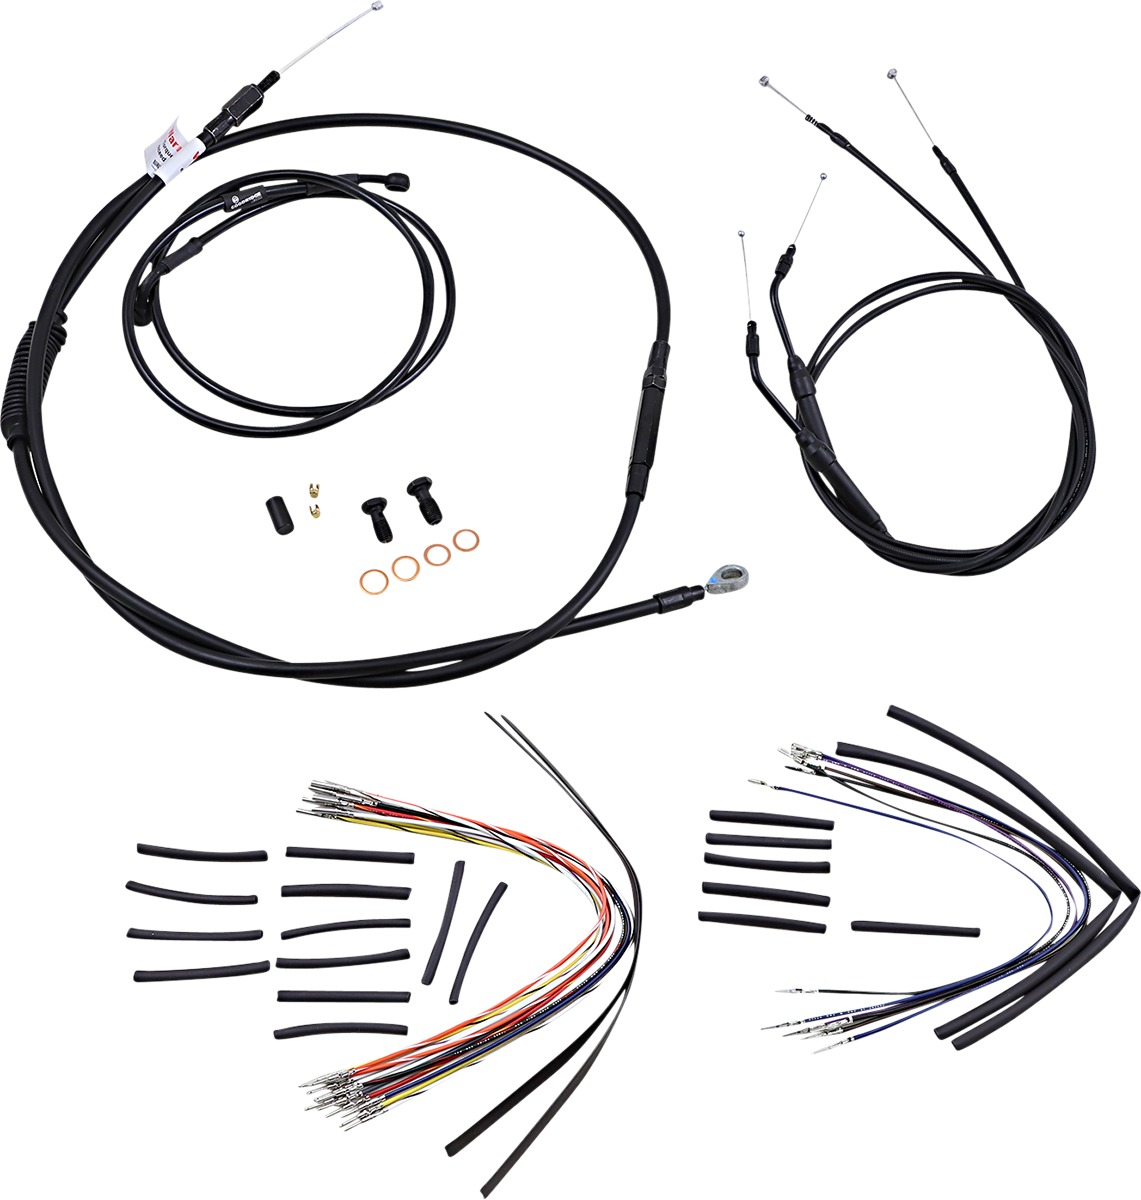 Extended Black Control Cable Kit 16" tall bars - 2006 HD Dyna Wide Glide - Click Image to Close